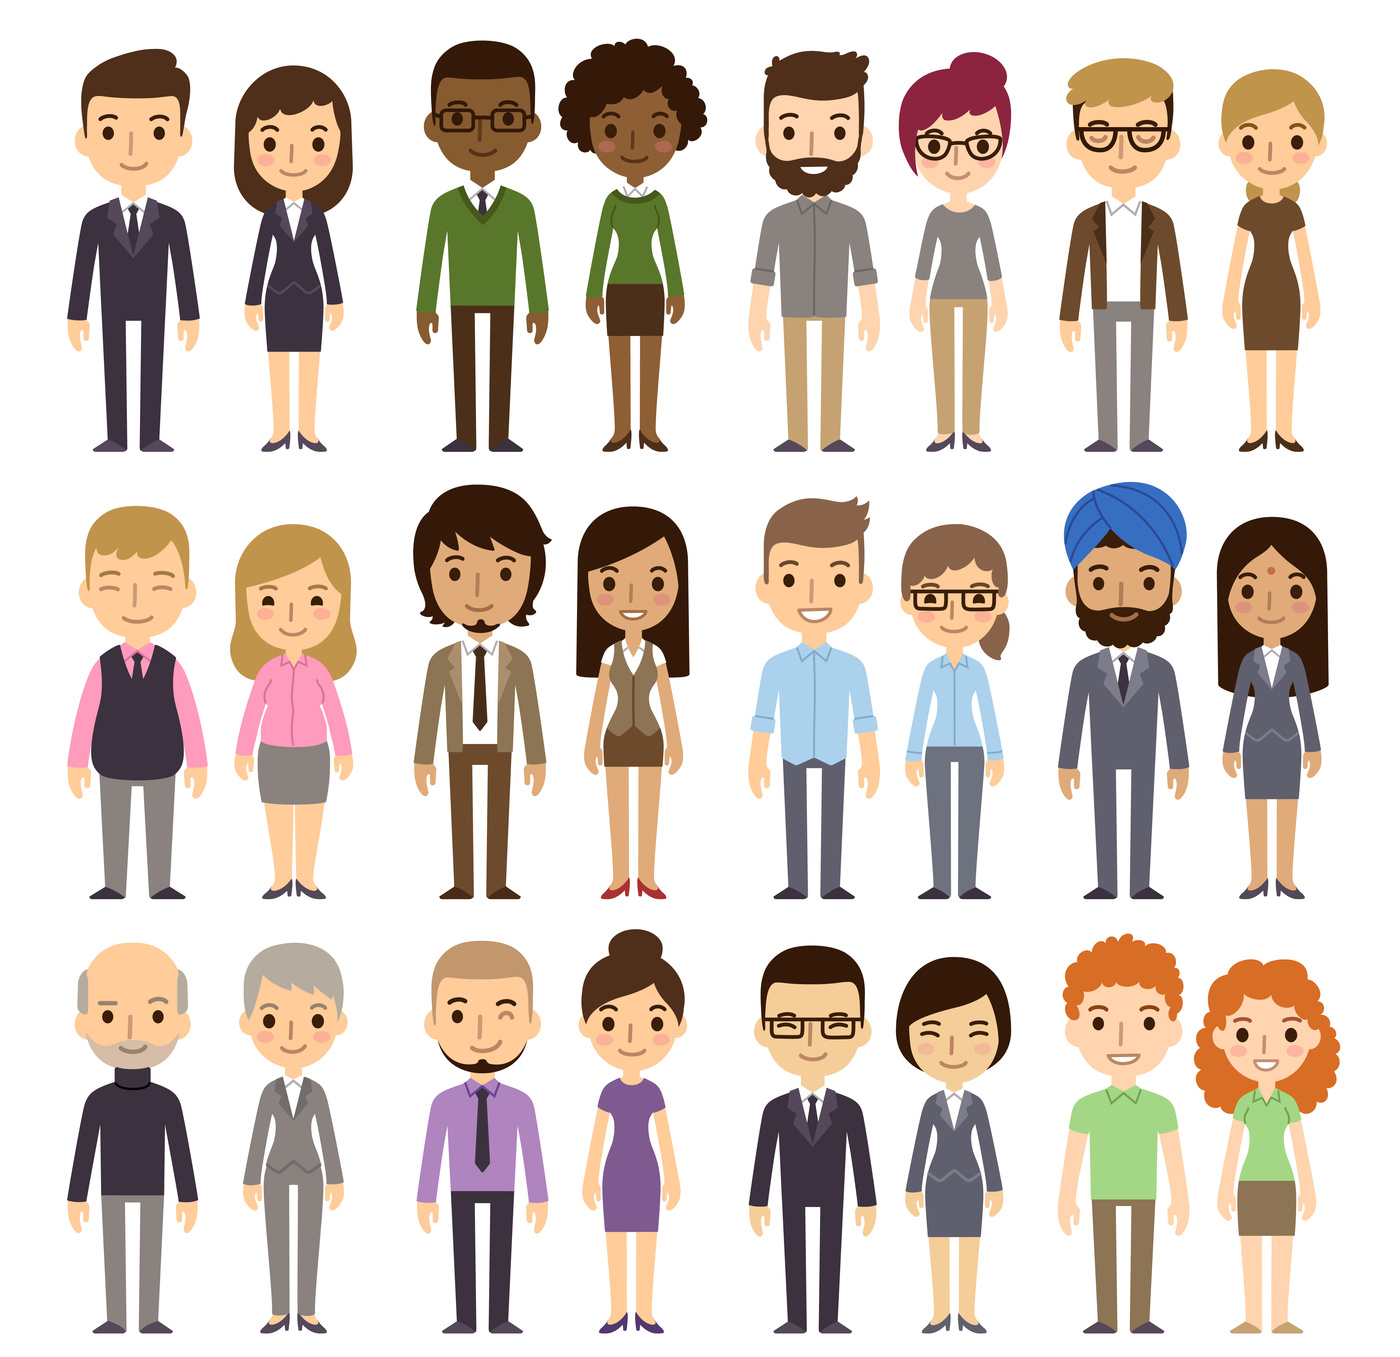 From Diversity to Inclusion: 4 Tips for a More Inclusive Work Environment